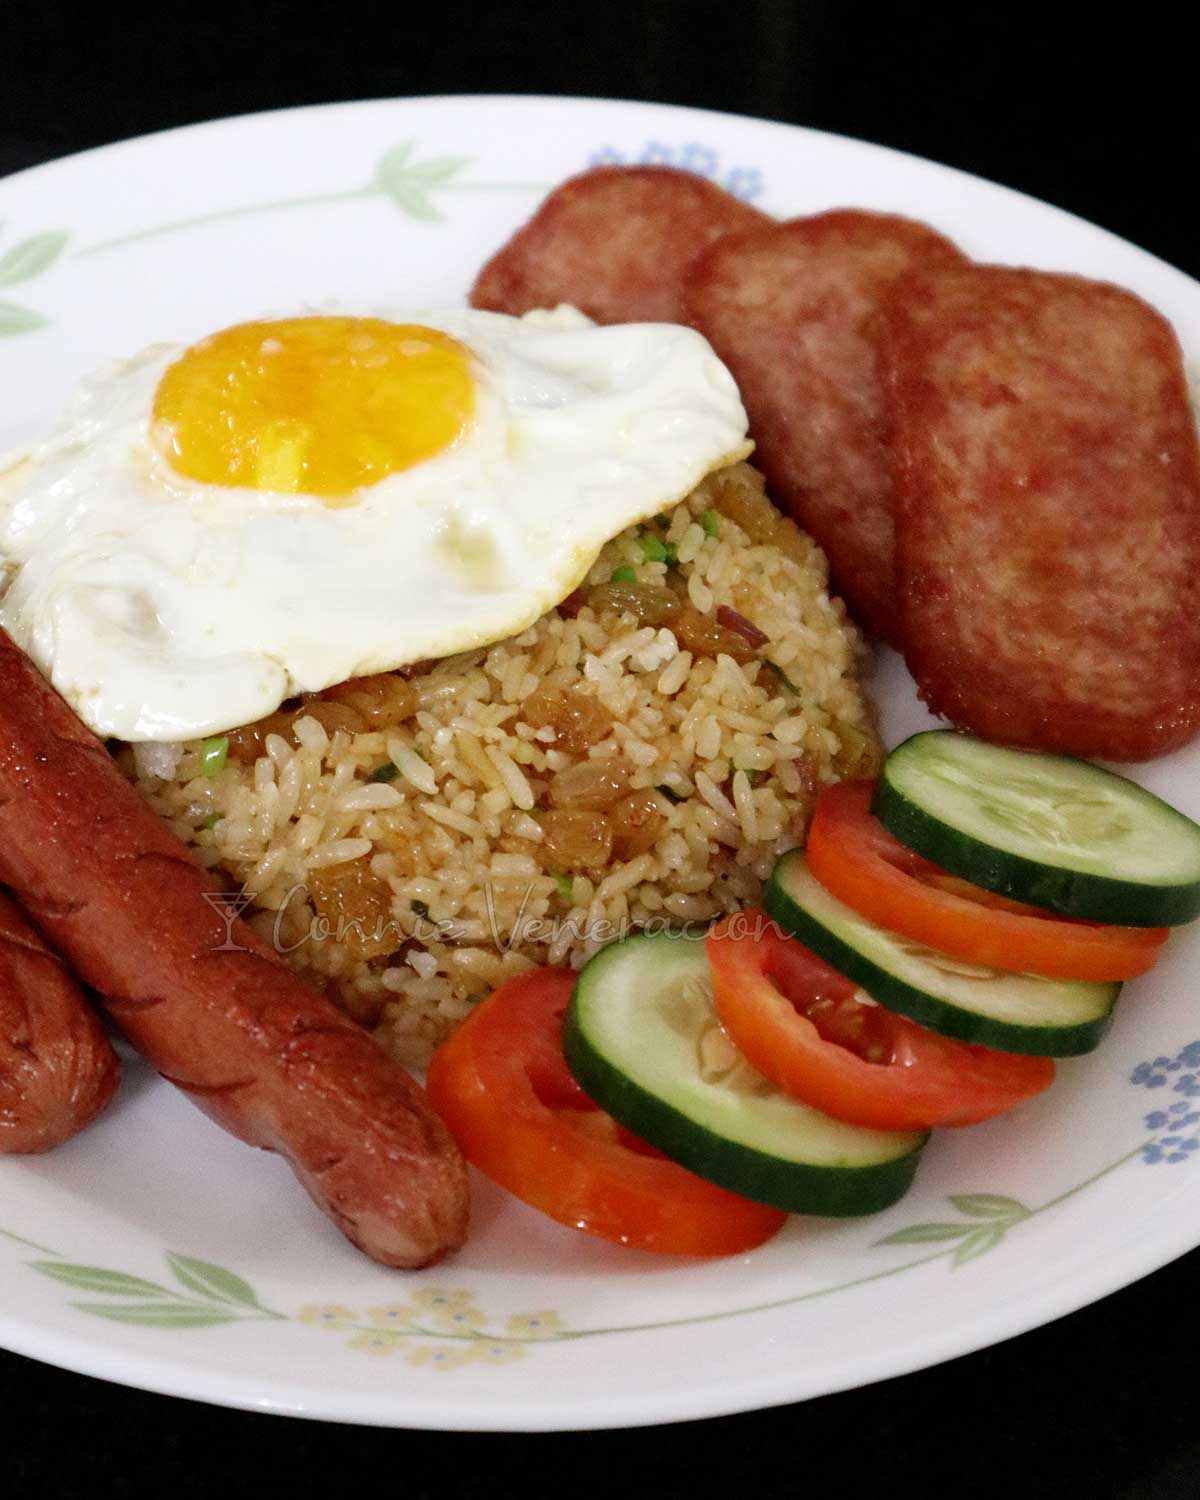 American fried rice (khao phad American) with hotdogs, SPAM and egg